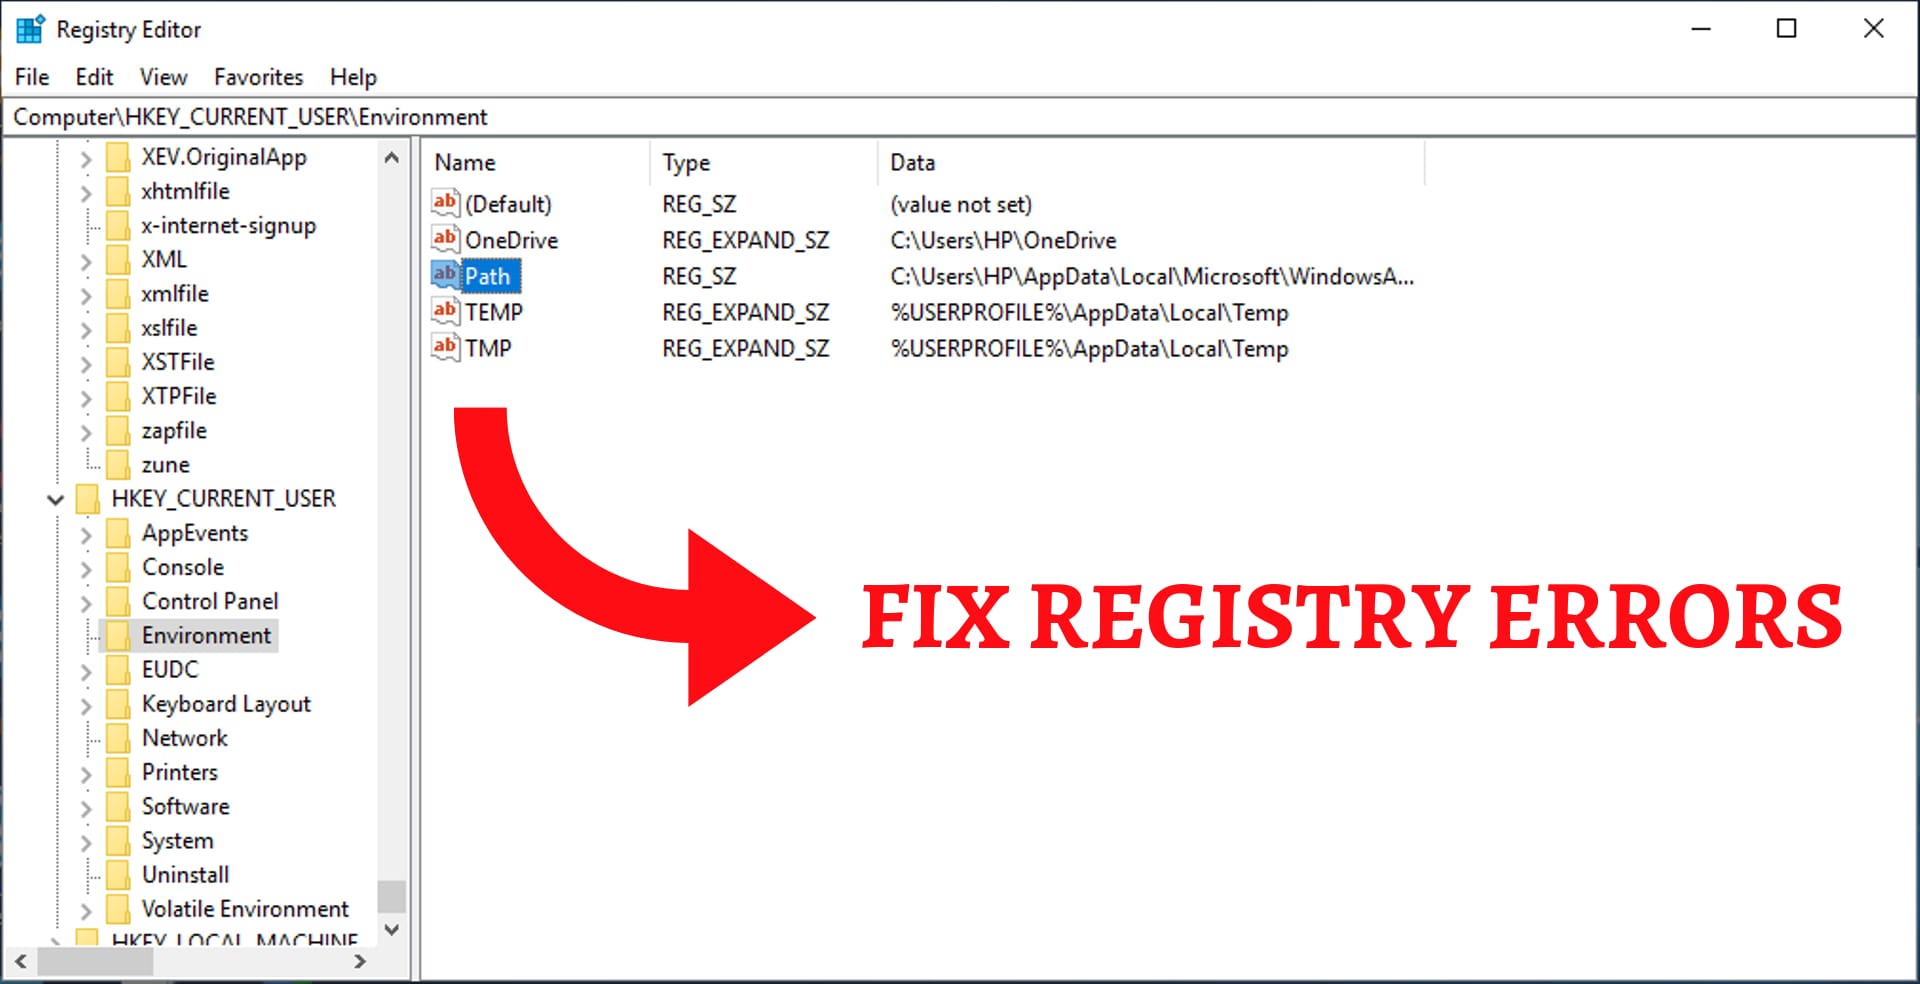 Registry Cleaner: Use a reputable registry cleaner tool to scan and fix any registry errors that may be impacting the performance of automagic.exe.
Reinstall Automagic.exe: Uninstall automagic.exe from your system and then reinstall it from a trusted source.